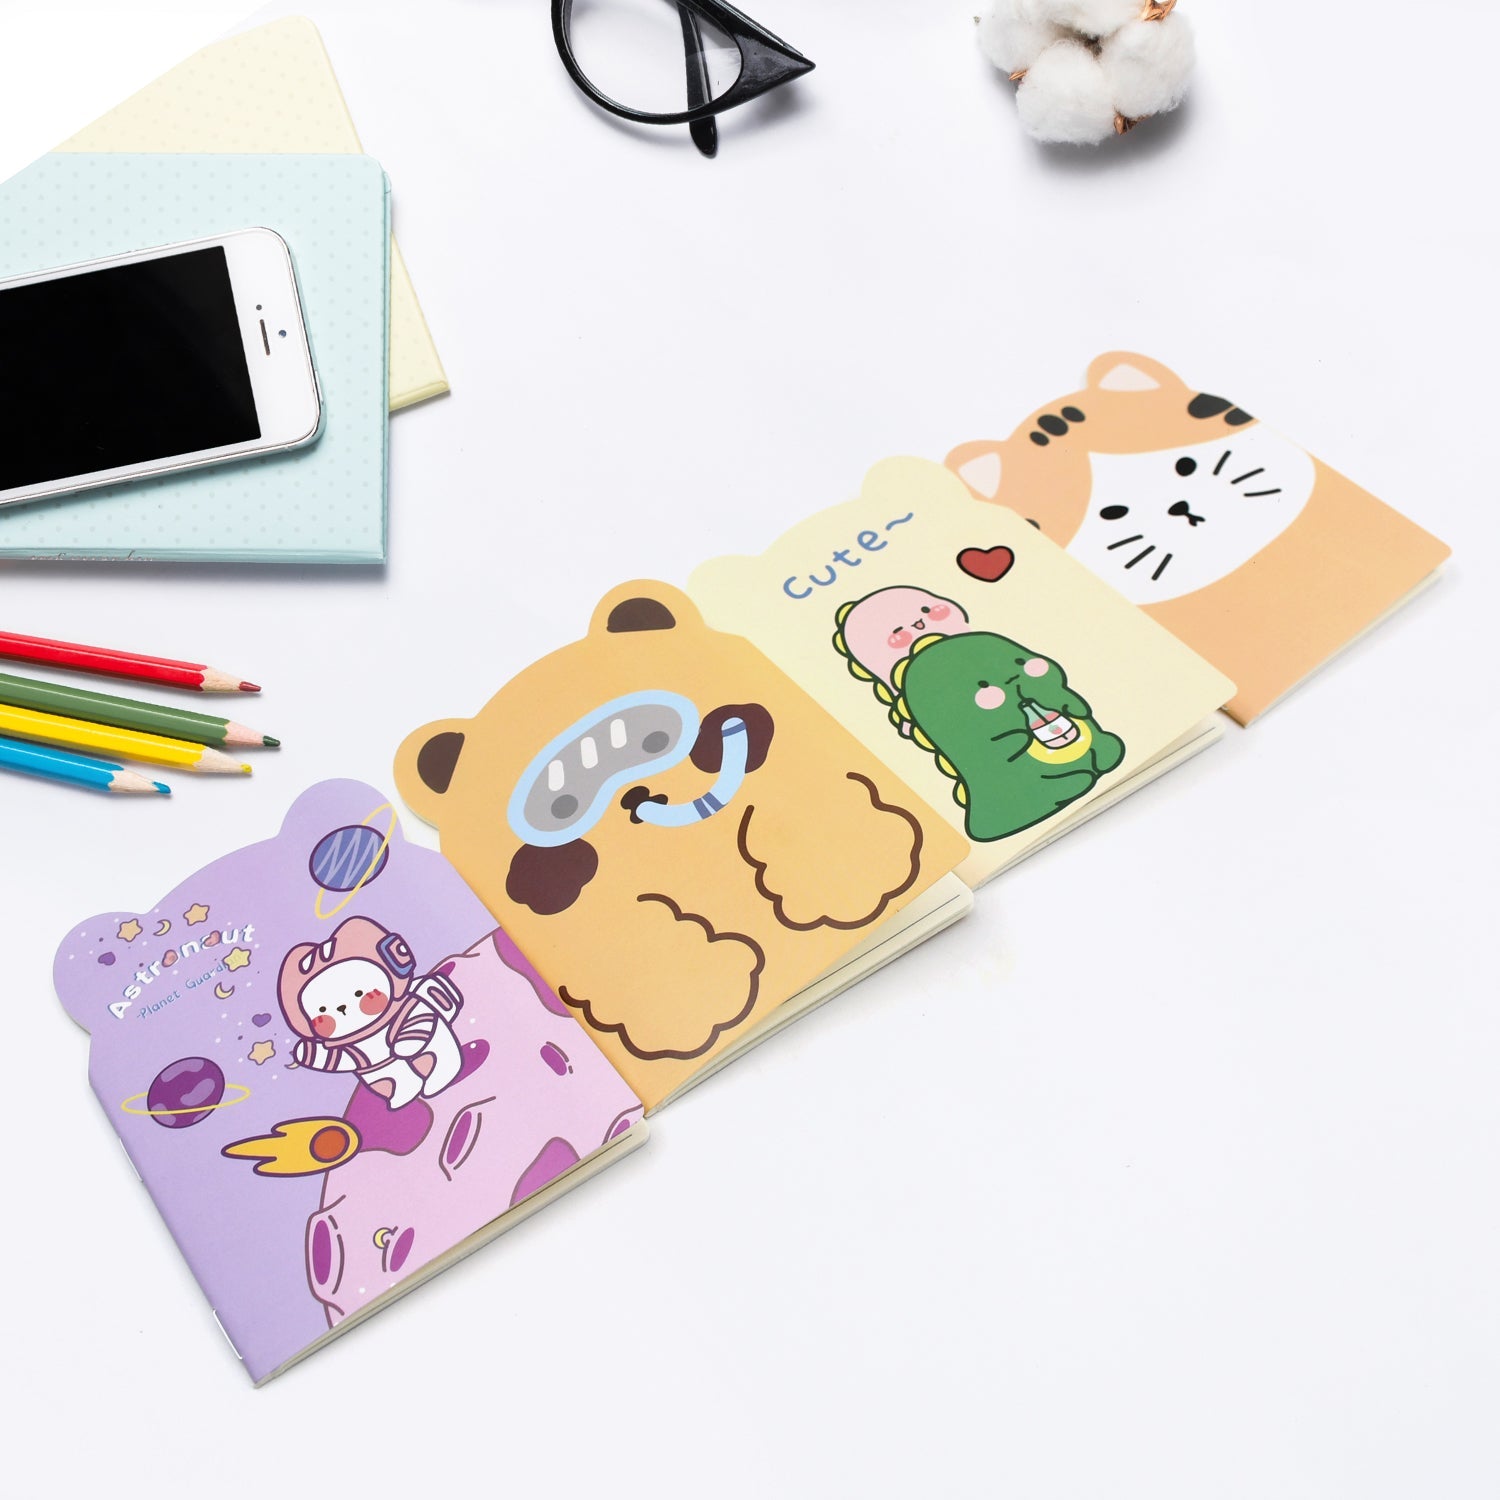 8872 Cute Cartoon Journal Diary, Notebook for Women Men Memo Notepad Sketchbook 16 Pages Writing Journal for Journaling Notes Study School Work Boys Girls, Stationery (120x85MM / 1 Pc)